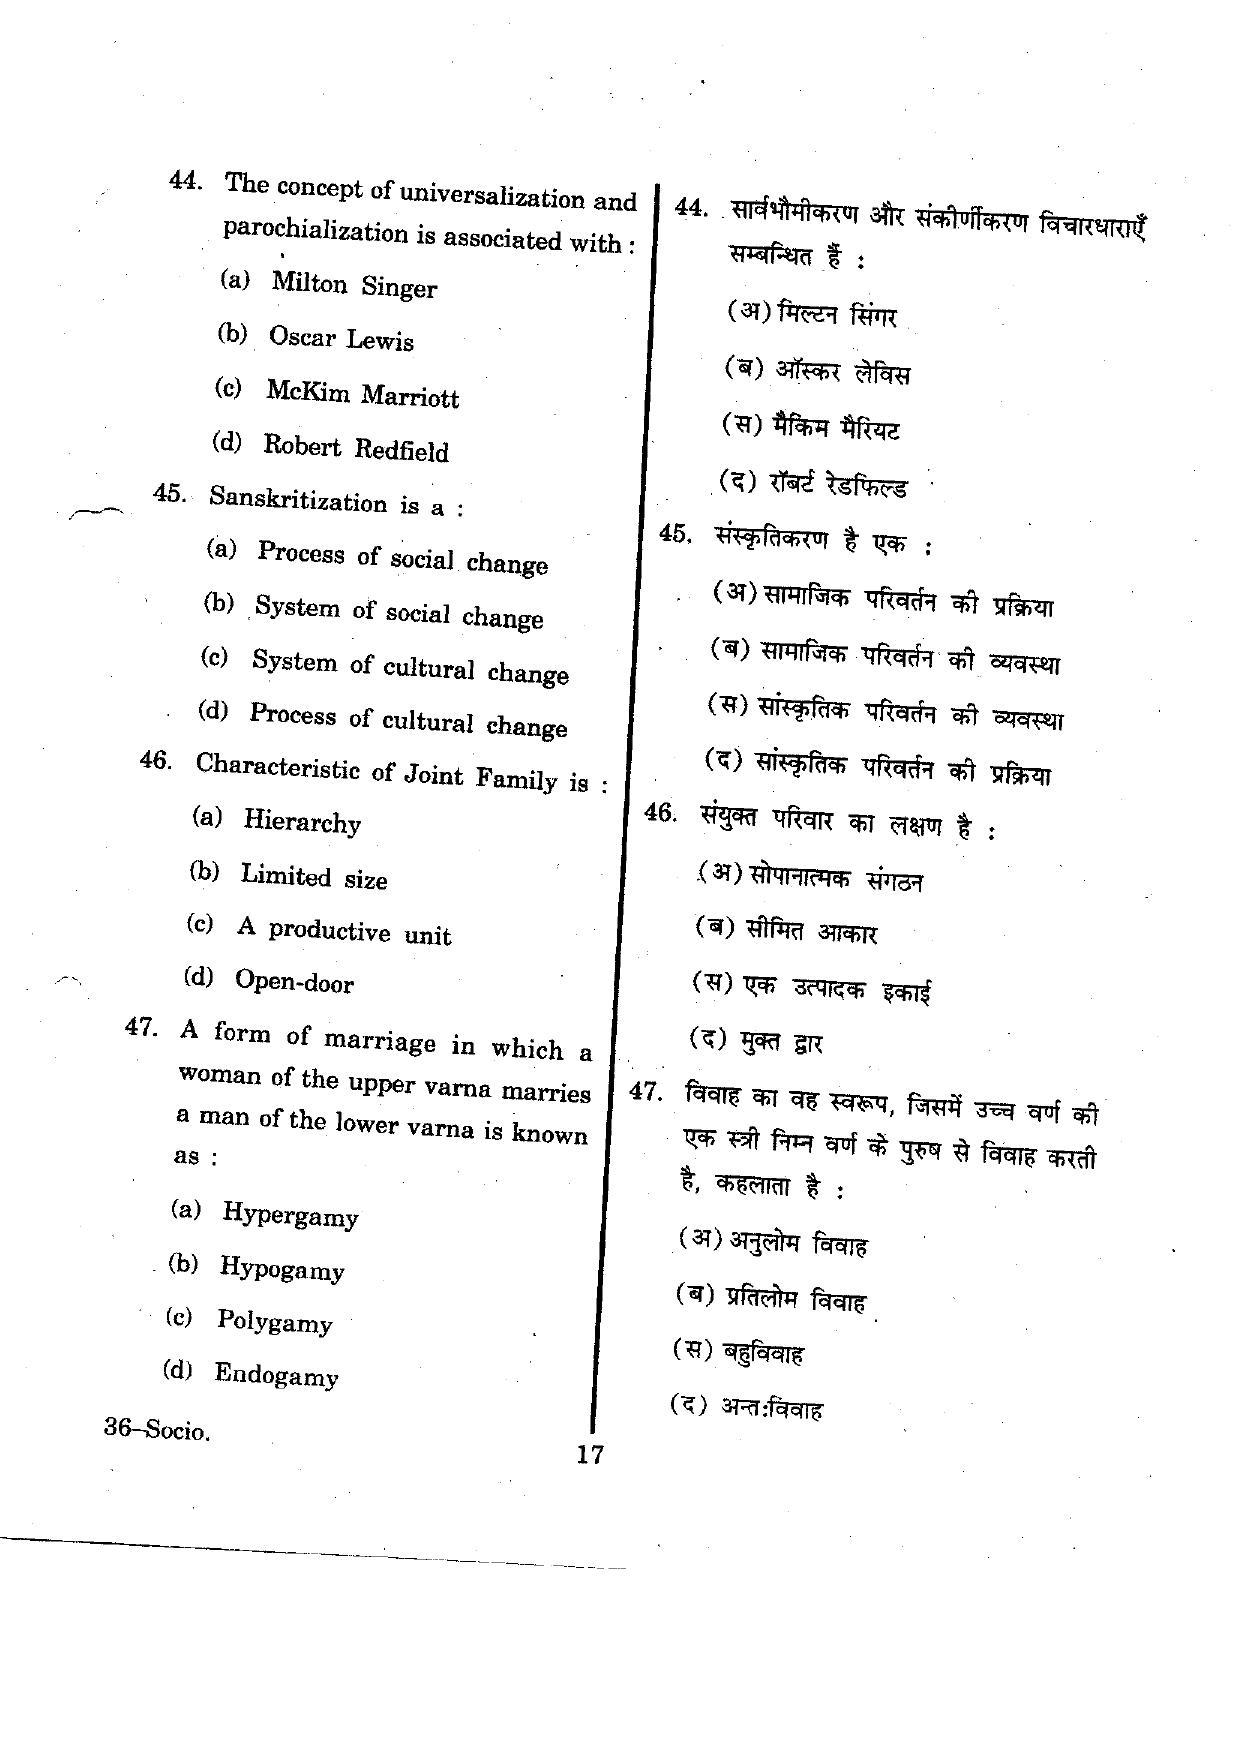 URATPG Sociology 2012 Question Paper - Page 17